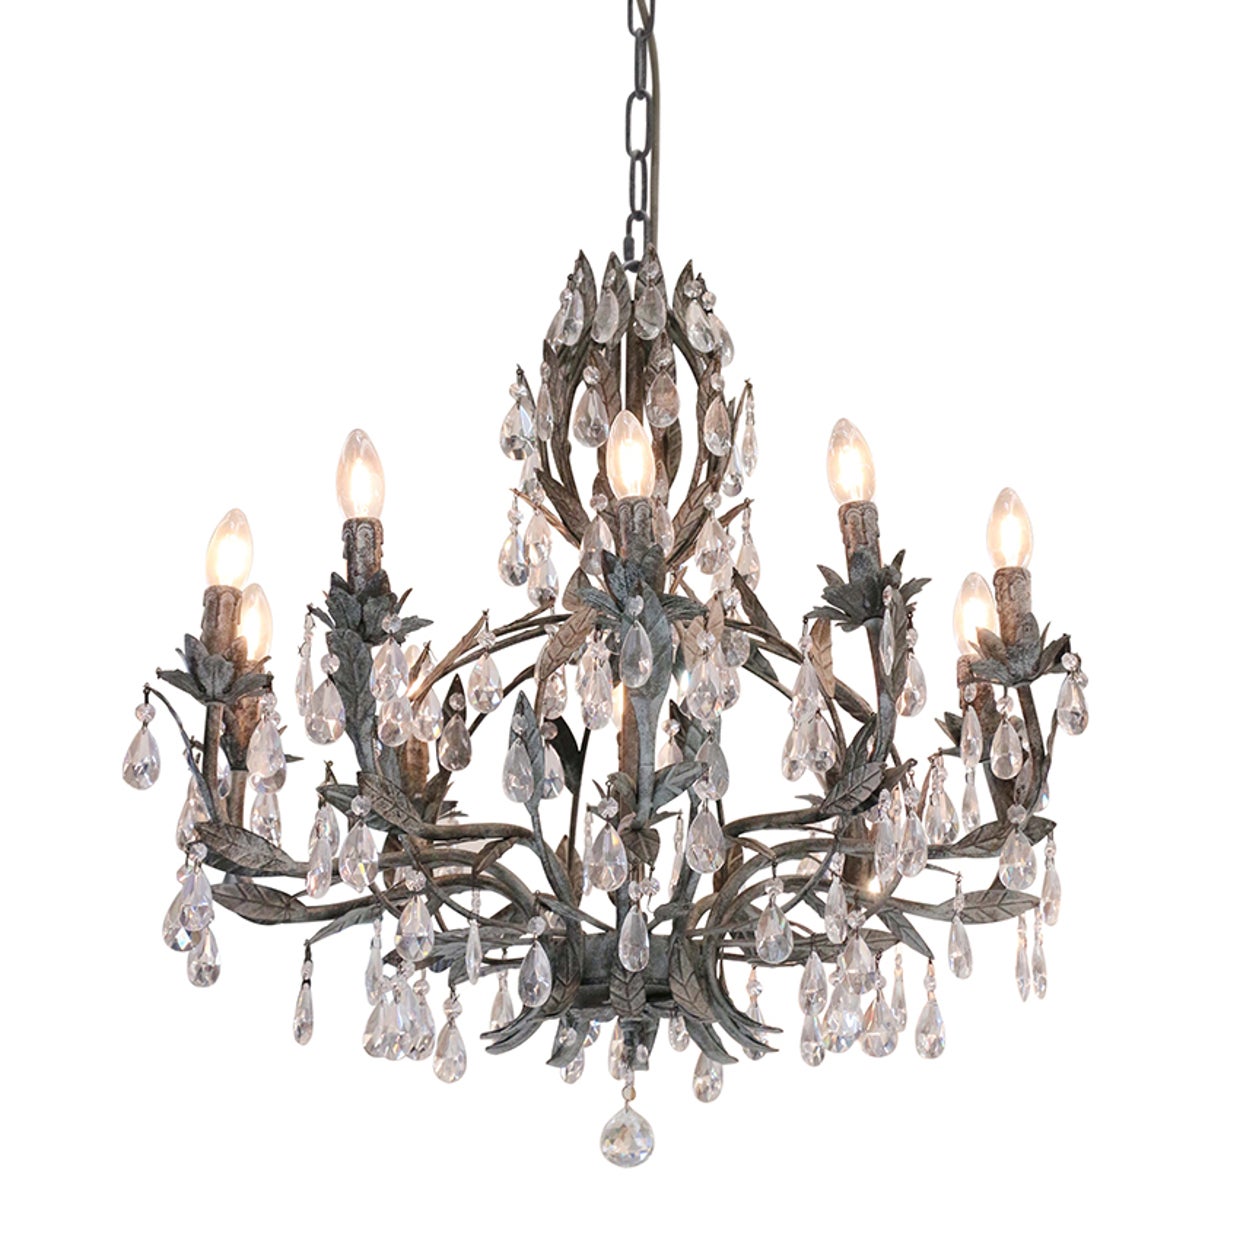 LARGE FLEURENCE CHANDELIER - TWO TONE TAUPE WITH GLASS CRYSTALS - 10 LIGHT